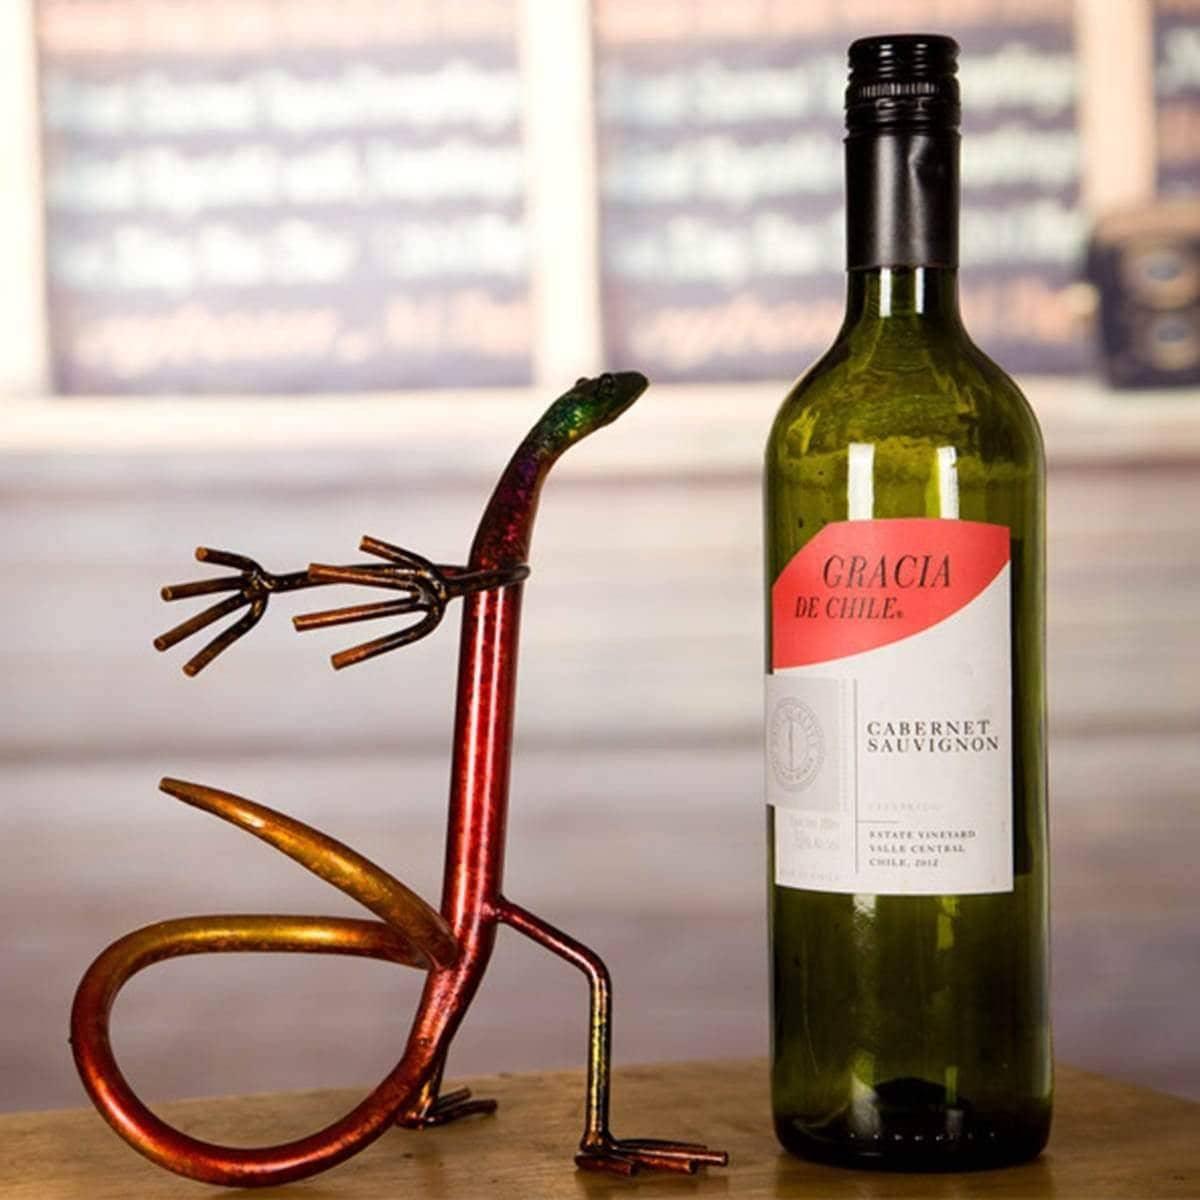 Gecko Wine Bottle Holder: Playful and Whimsical Wine Accessory